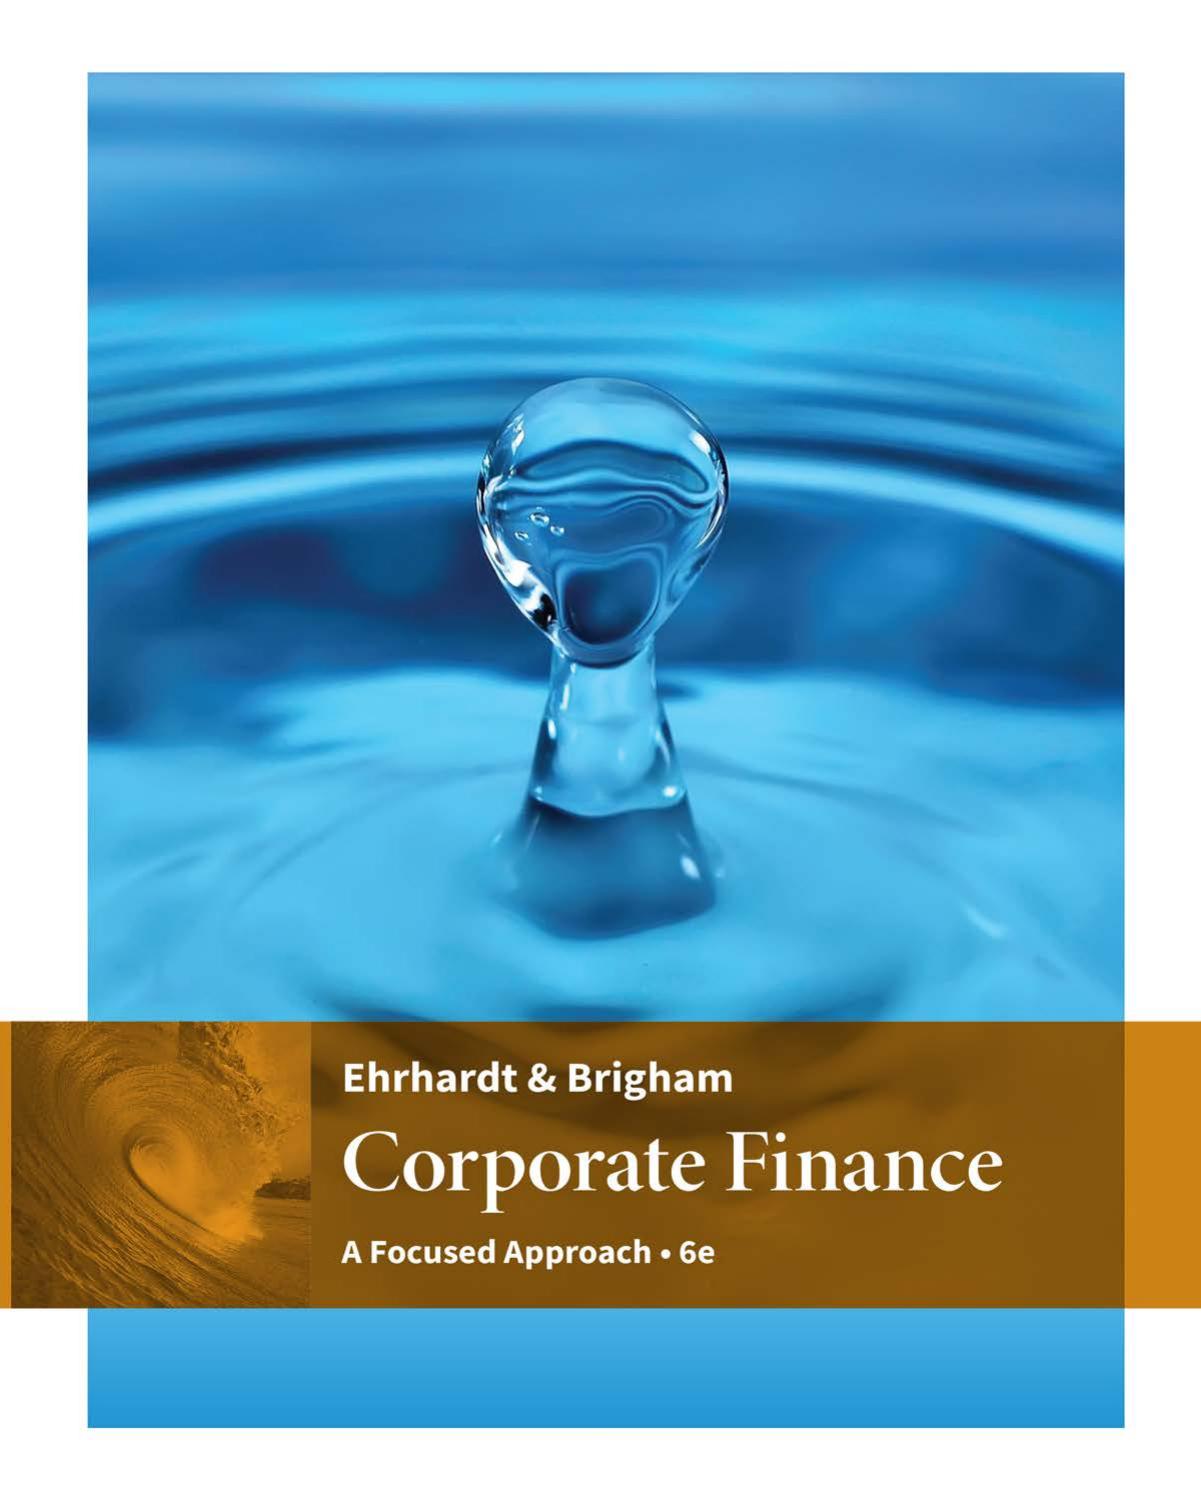 Corporate Finance A Focused Approach 6th Edition.jpg